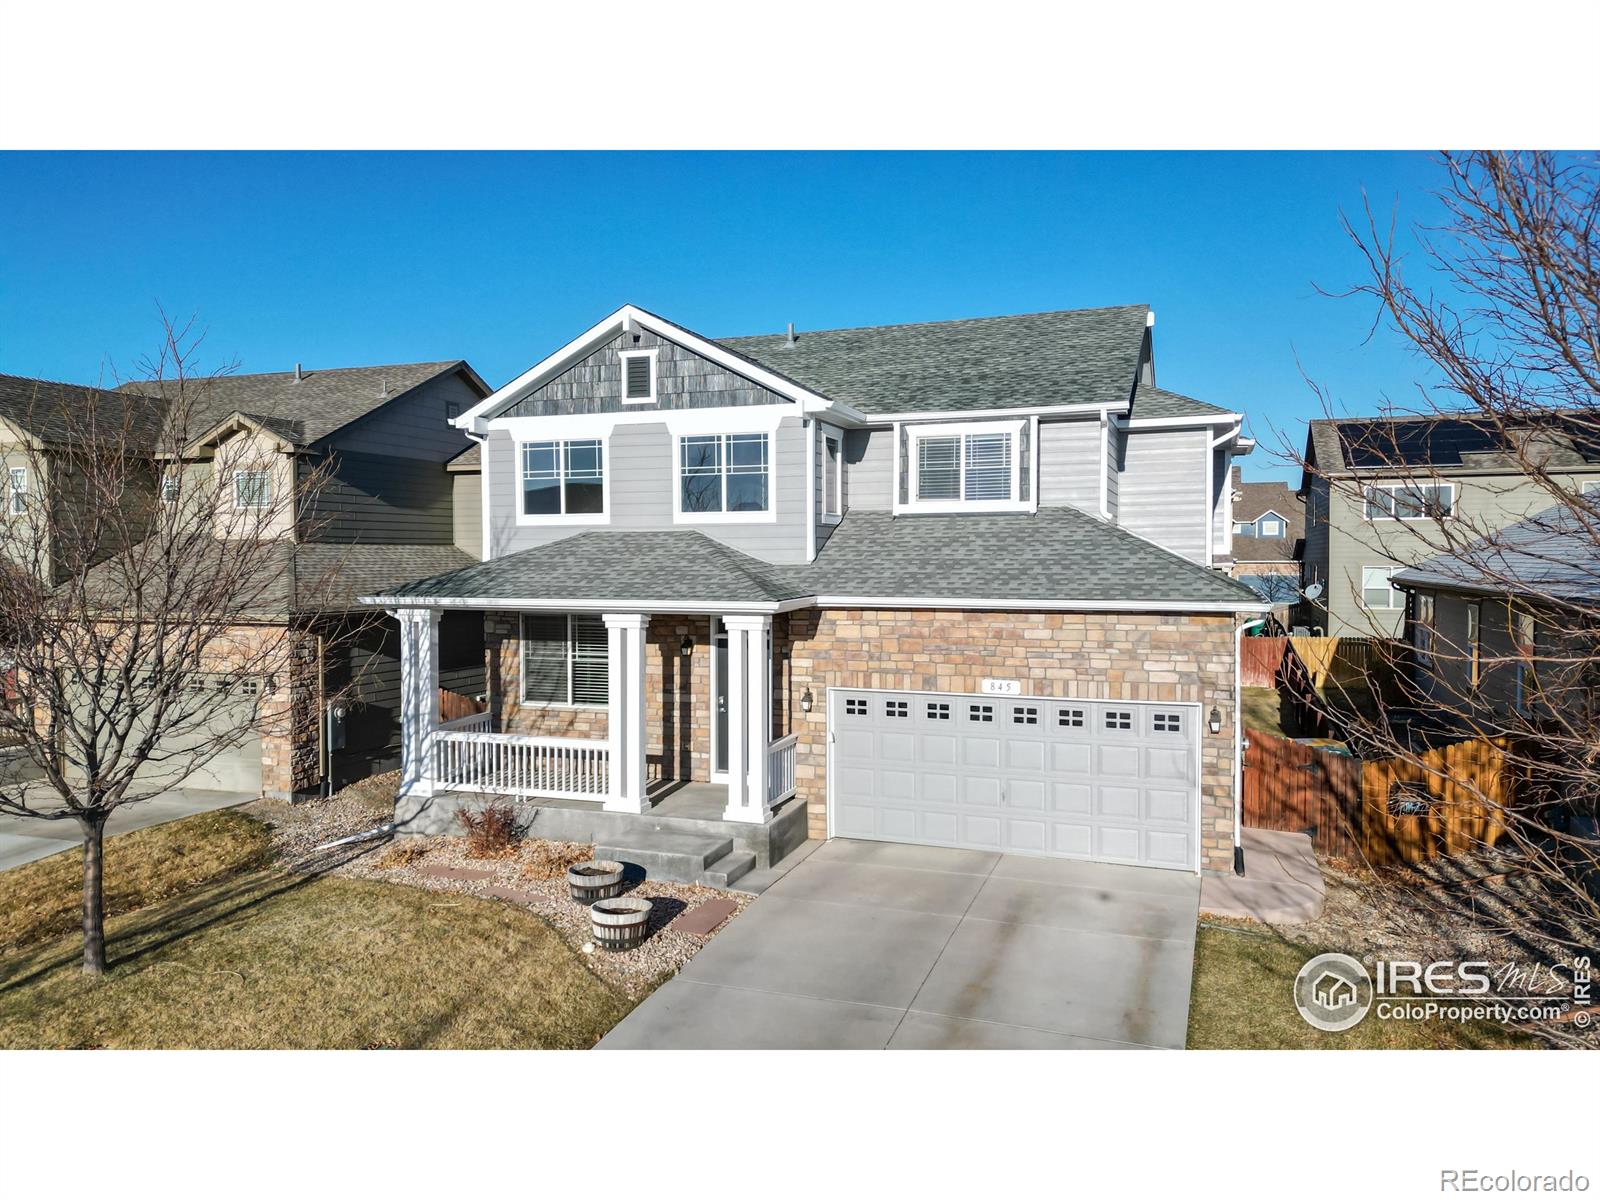 845  Campfire Drive, fort collins MLS: 4567891004671 Beds: 3 Baths: 3 Price: $545,000